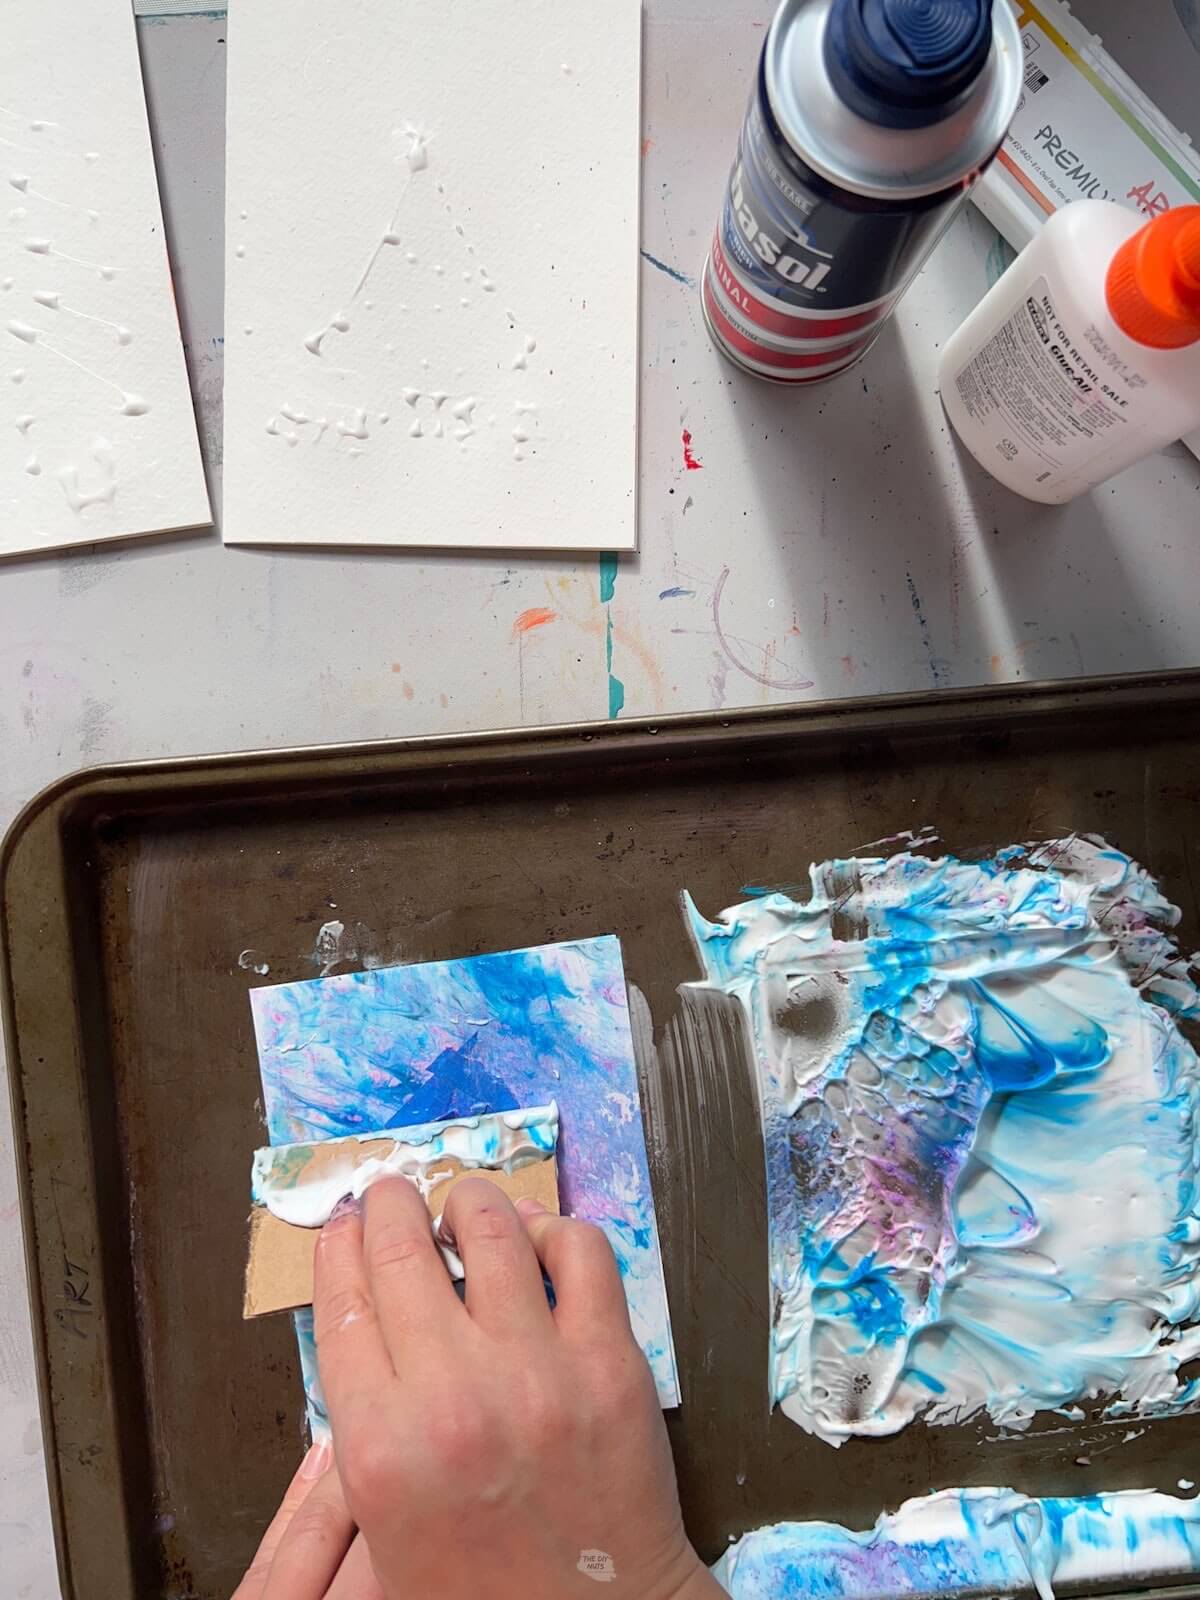 hand holding cardboard and scraping blue and purple shaving cream off.